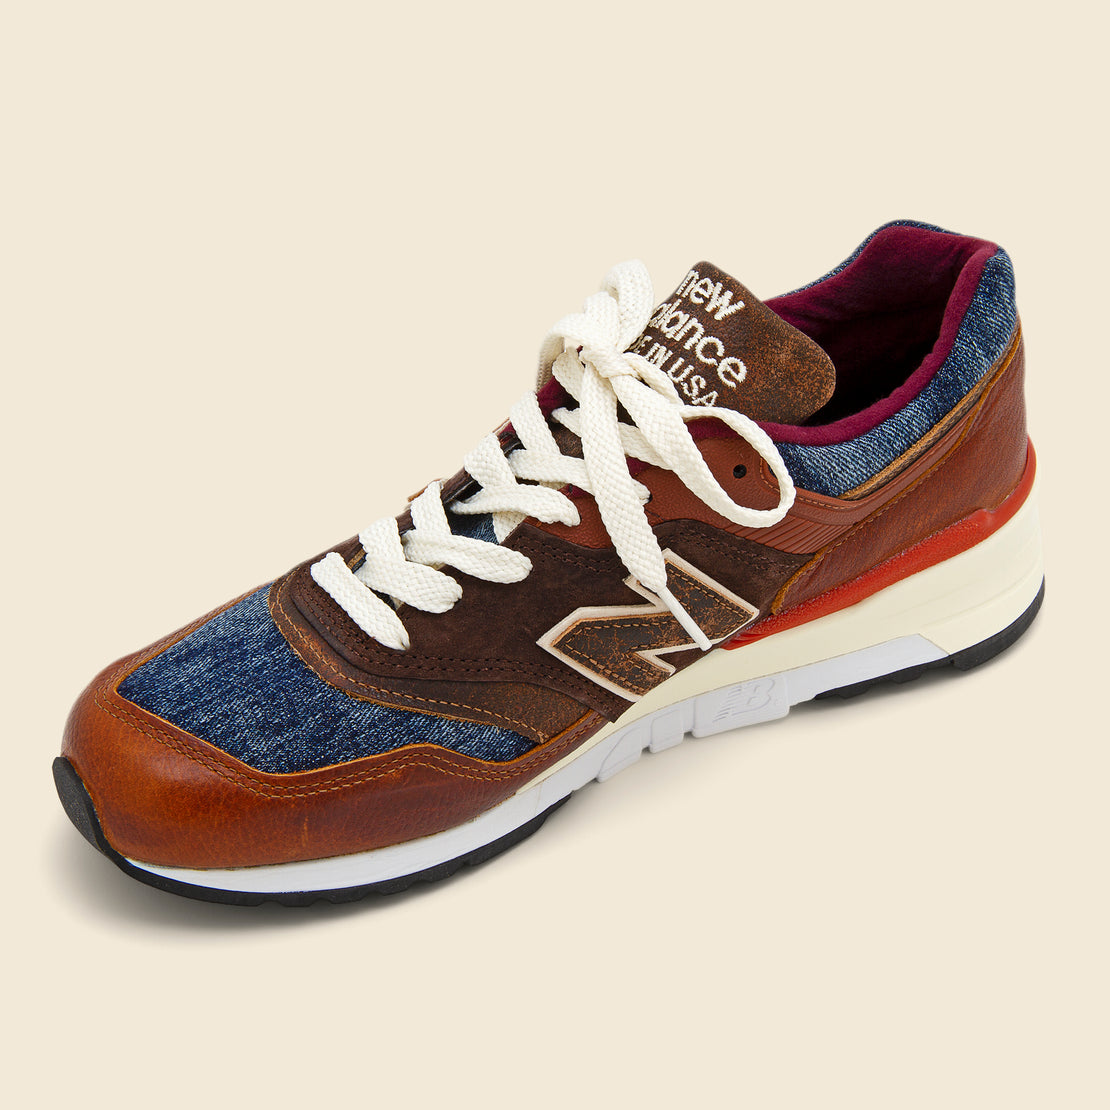 997 Sneaker - Brown/Blue - New Balance - STAG Provisions - Shoes - Athletic